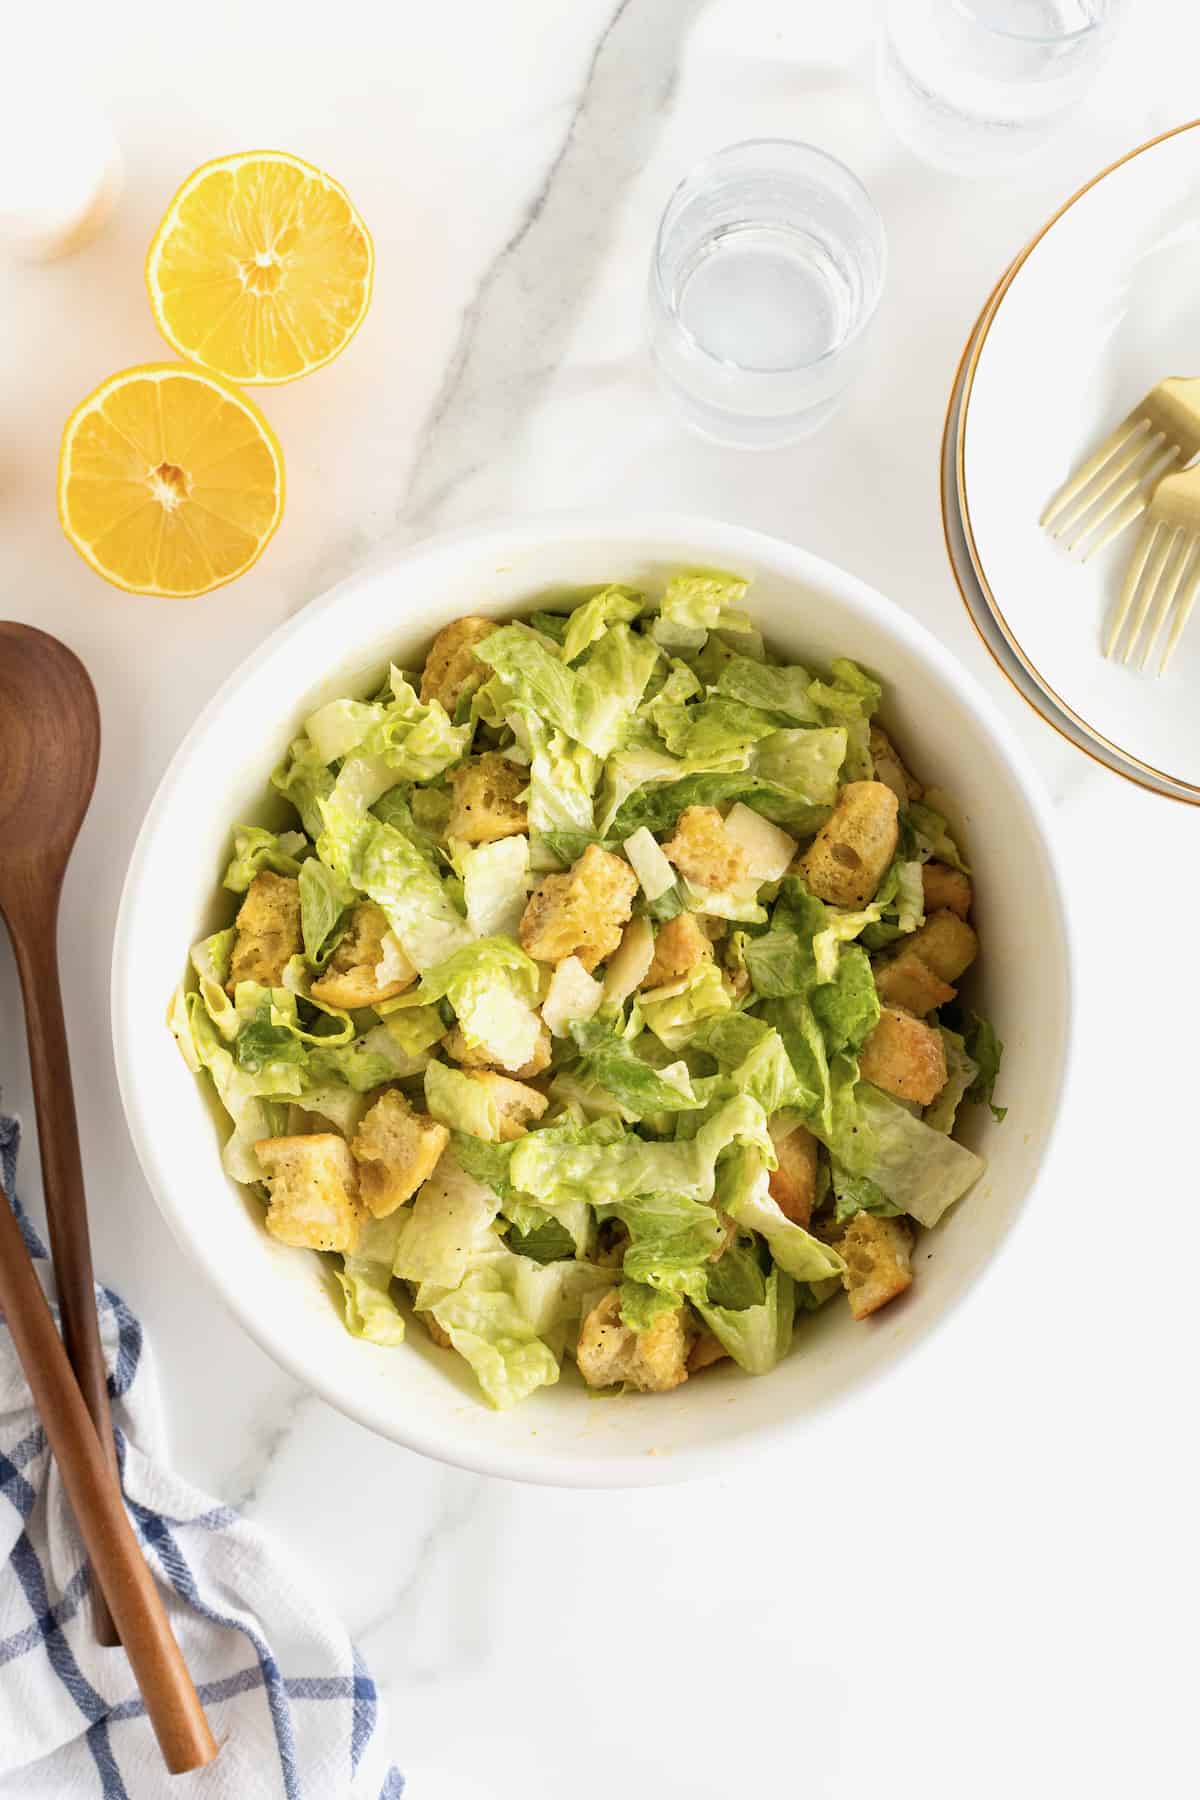 A large white serving bowl filled with caesar salad topped with croutons. Two wooden spoons sit next to the bowl of salad.